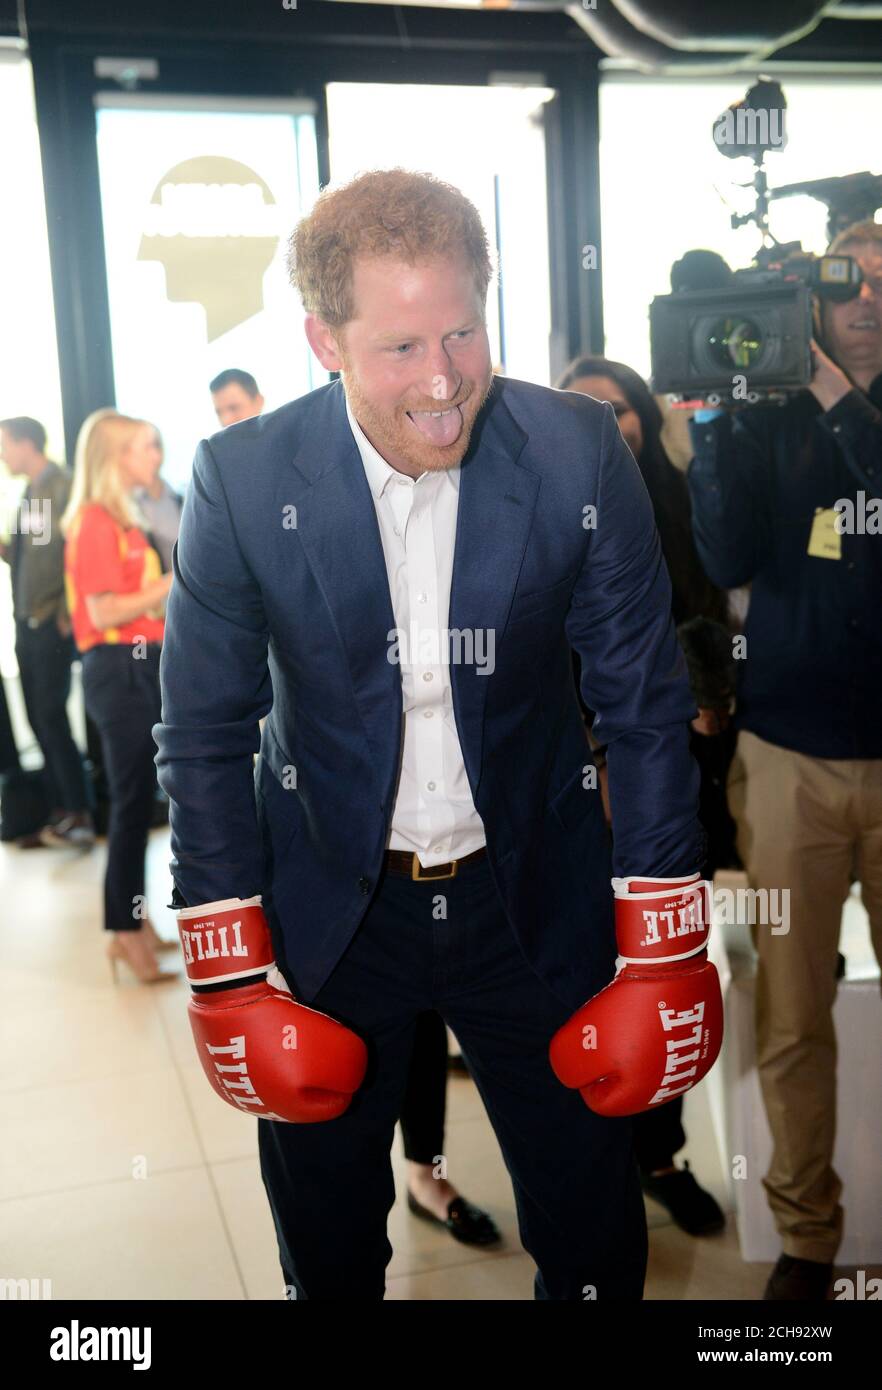 Prince Harry spars with former boxer Duke McKenzie (not pictured) at the Queen Elizabeth Olympic Park in east London, as he launches Heads Together with the Duke and Duchess of Cambridge - their new campaign to end mental health stigma. Stock Photo